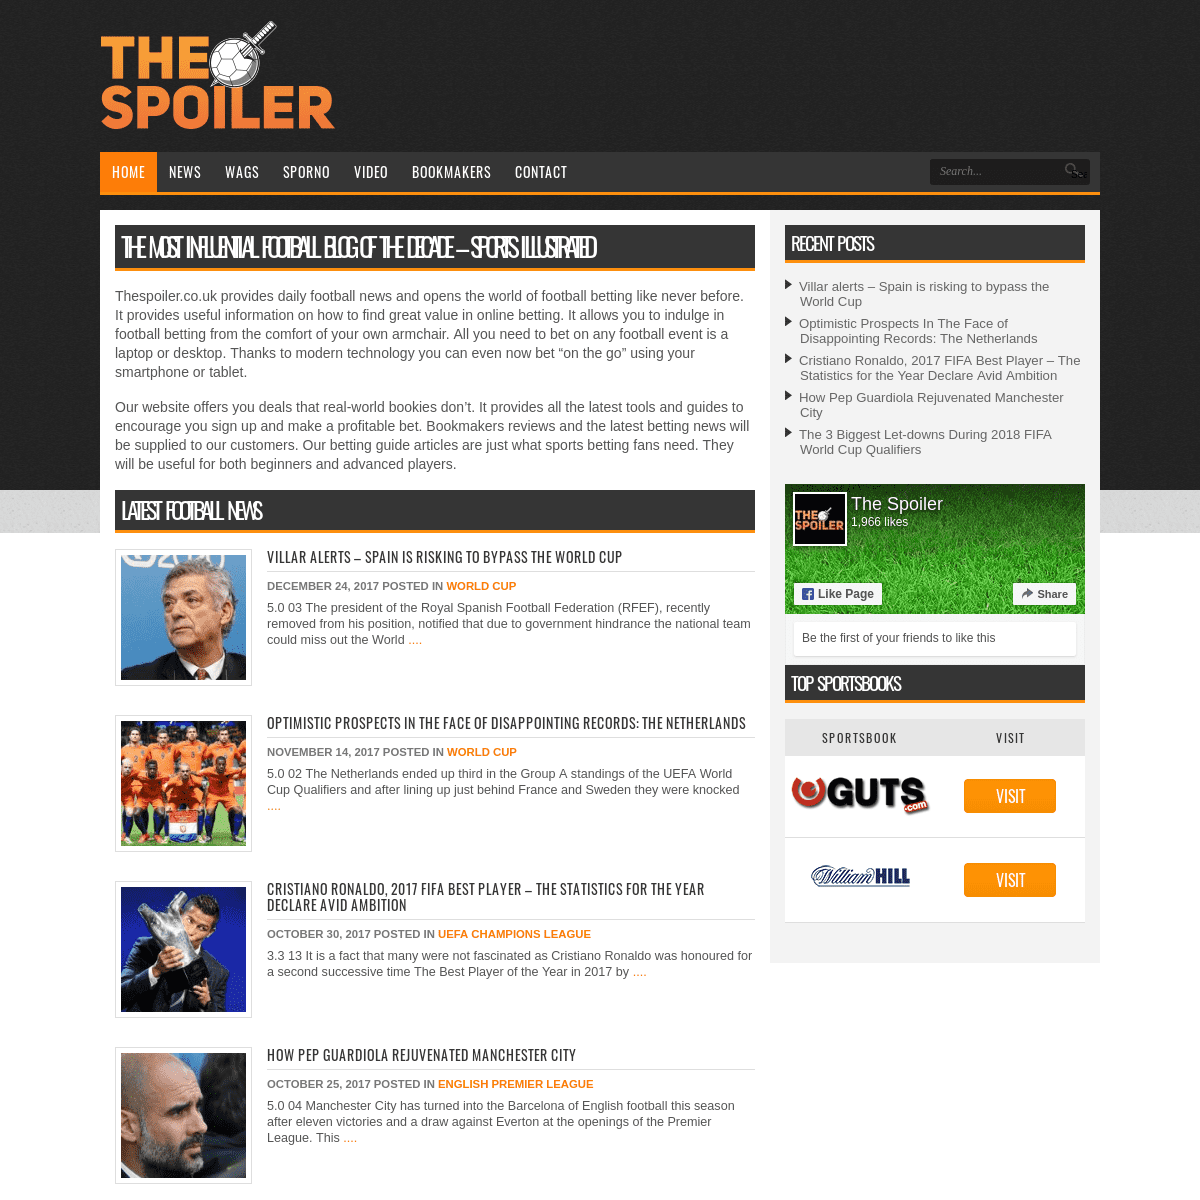 A complete backup of thespoiler.co.uk